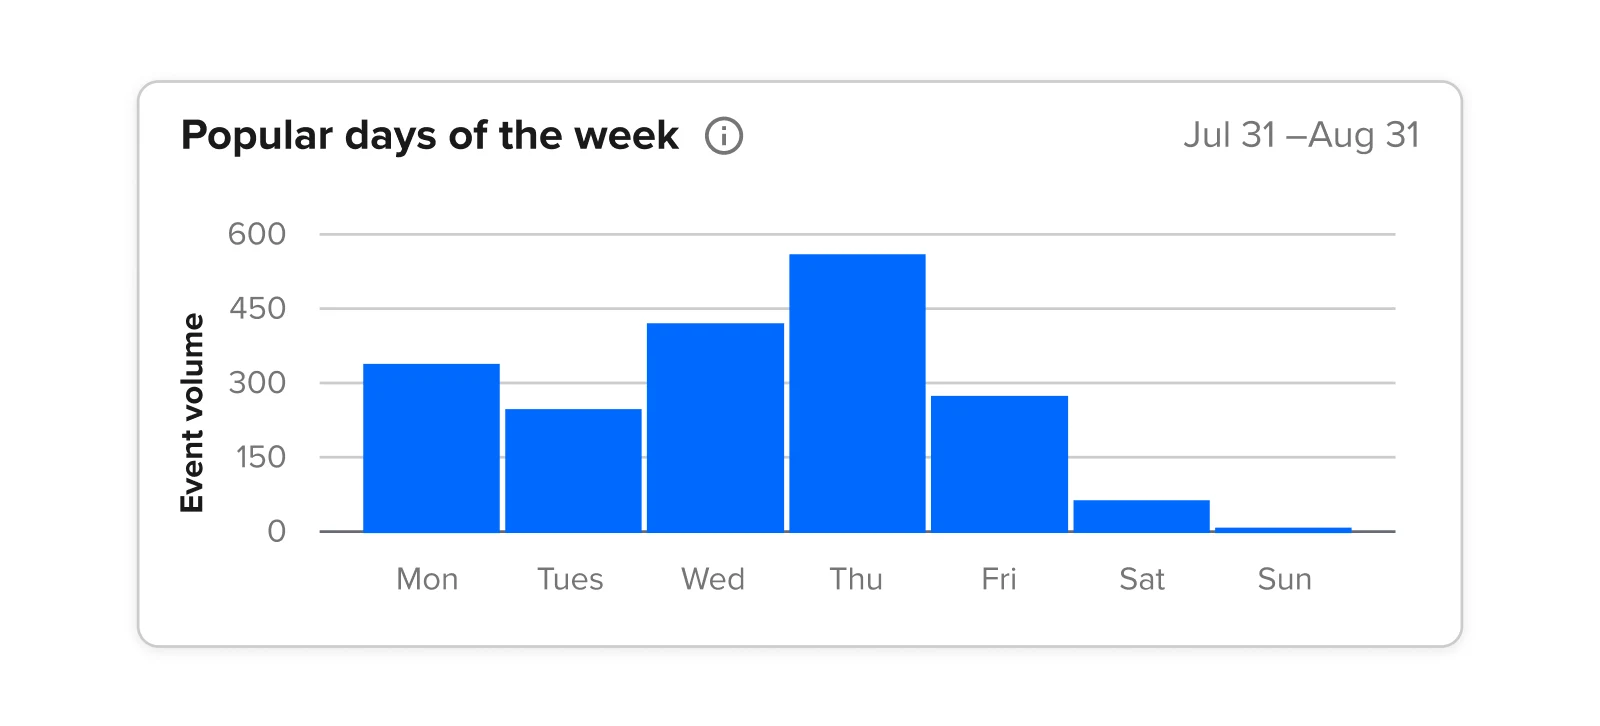 Calendly Analytics - graph showing popular days of the week for scheduling meetings